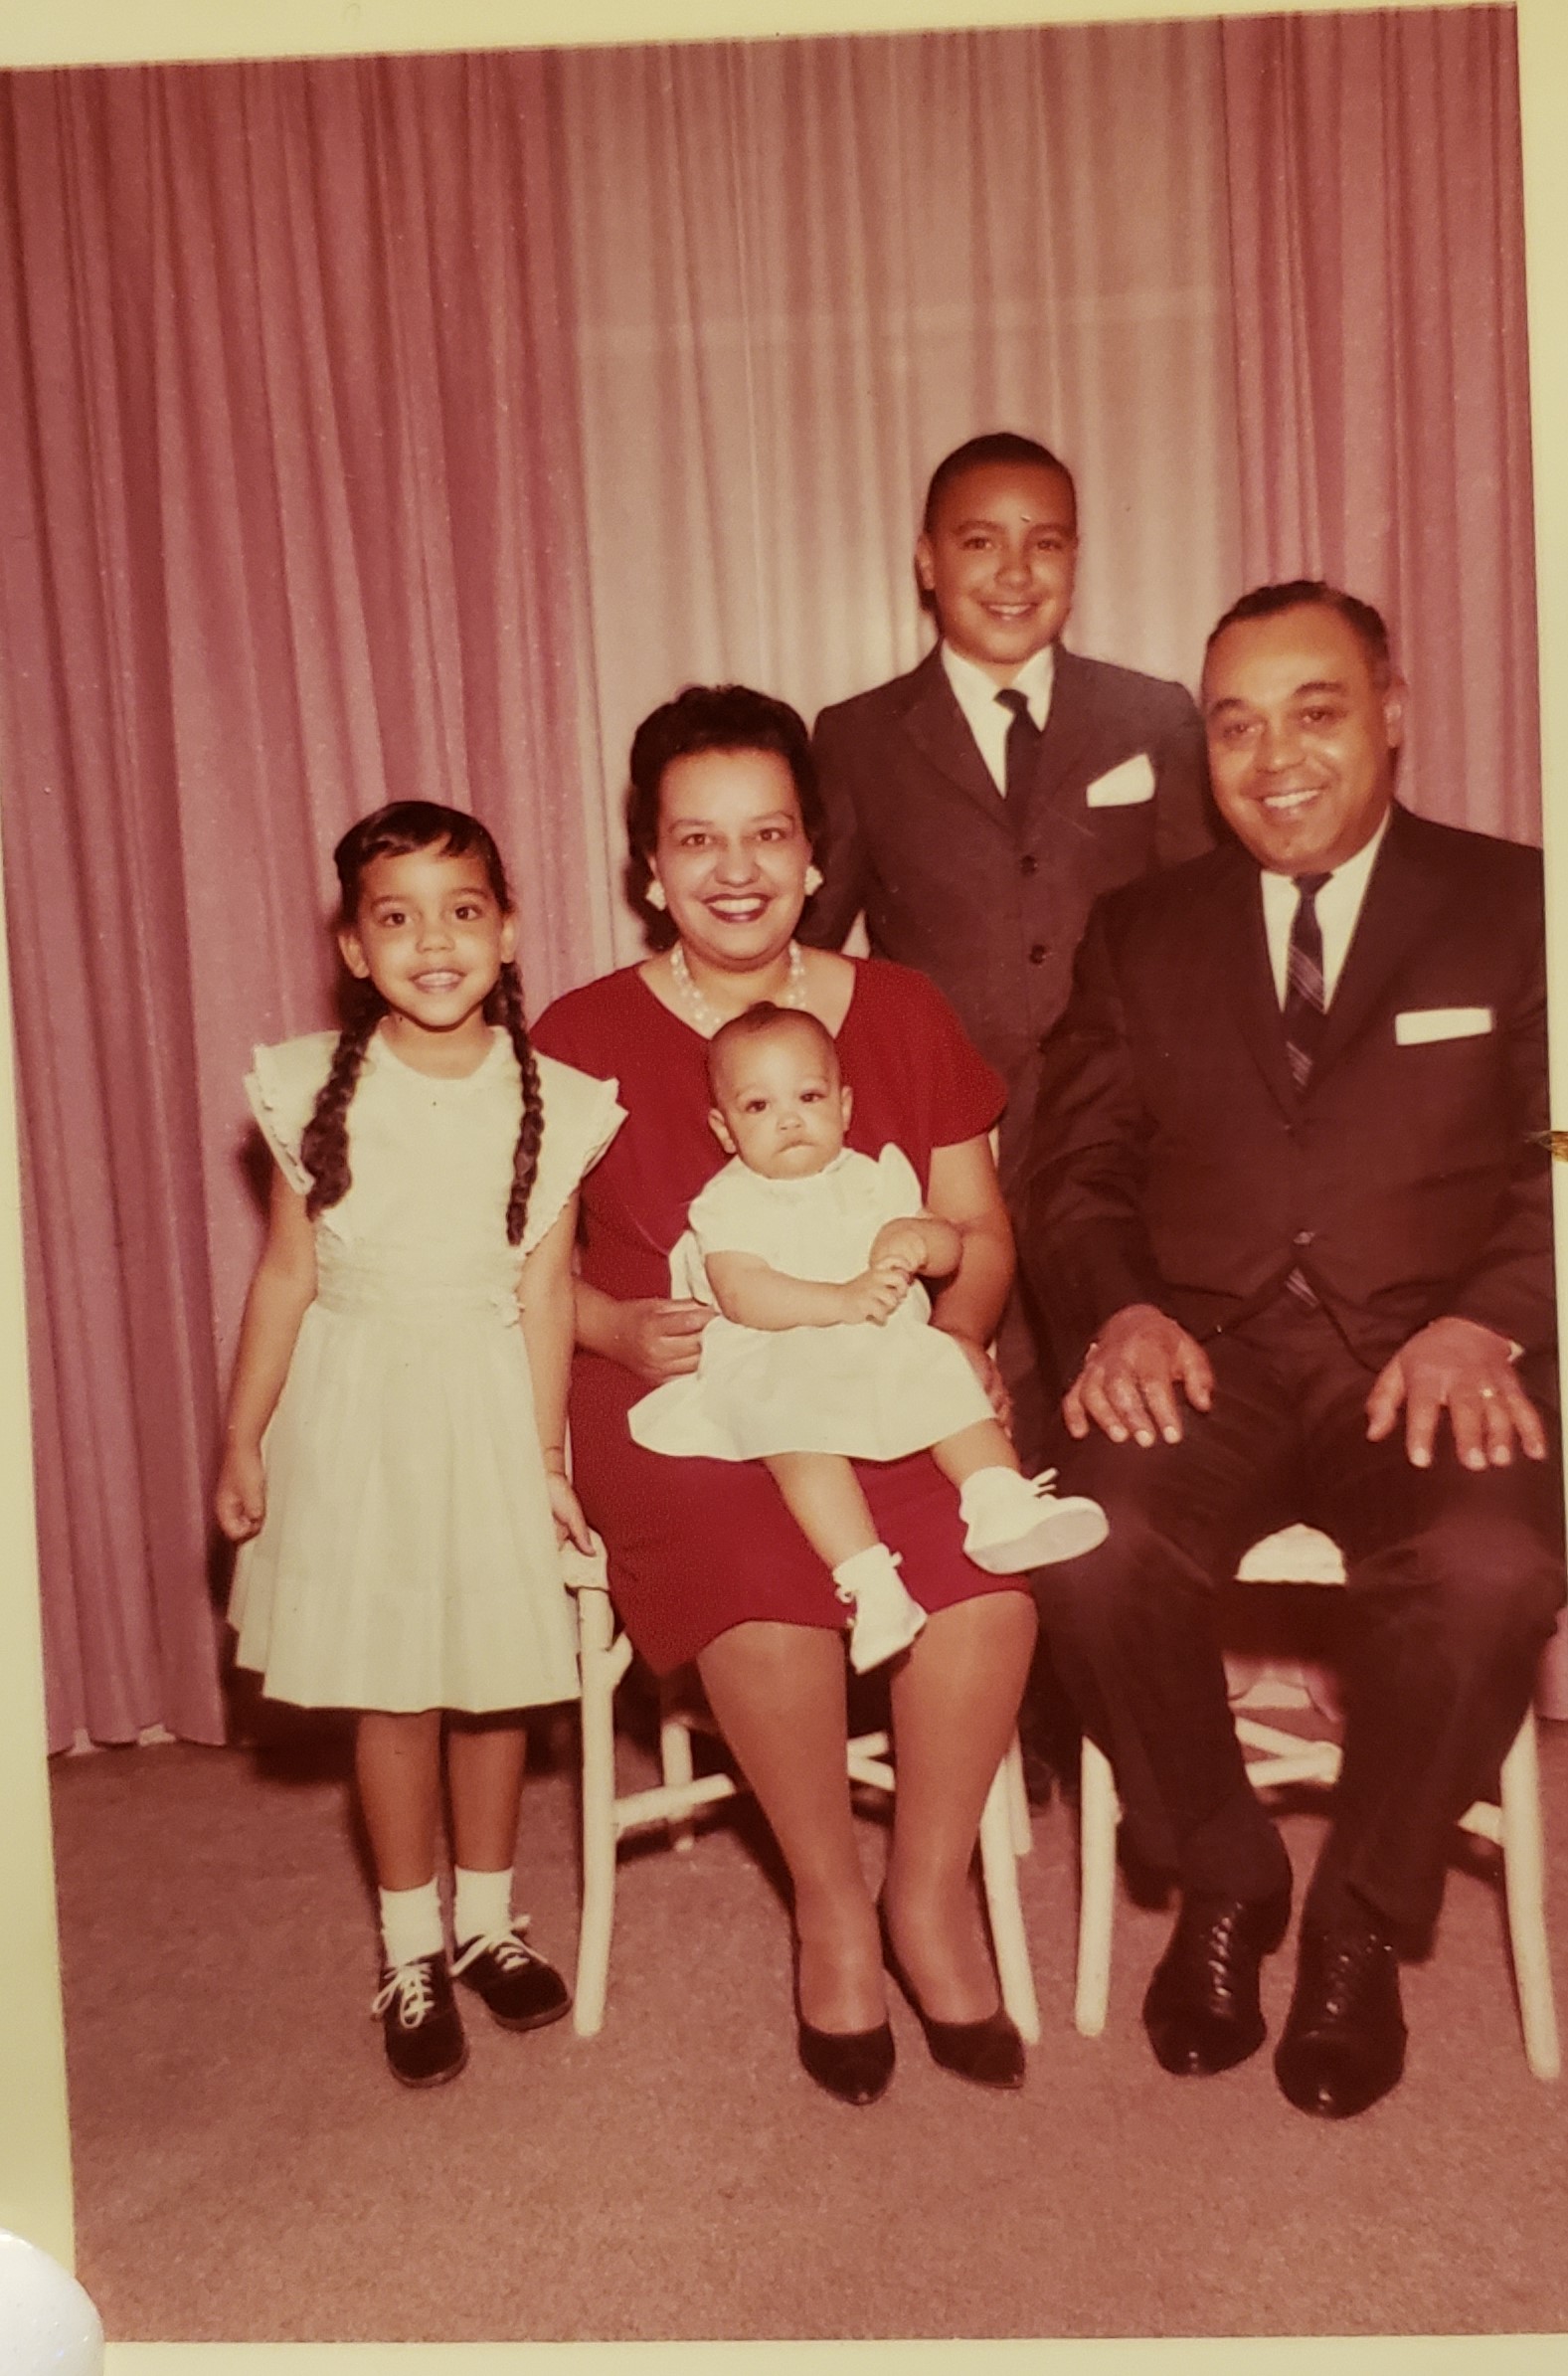 Allen family photo from 1963. a man and woman seated in chairs, two children standing, and a baby in the woman's lap. they are all wearing formal attire and smiling.